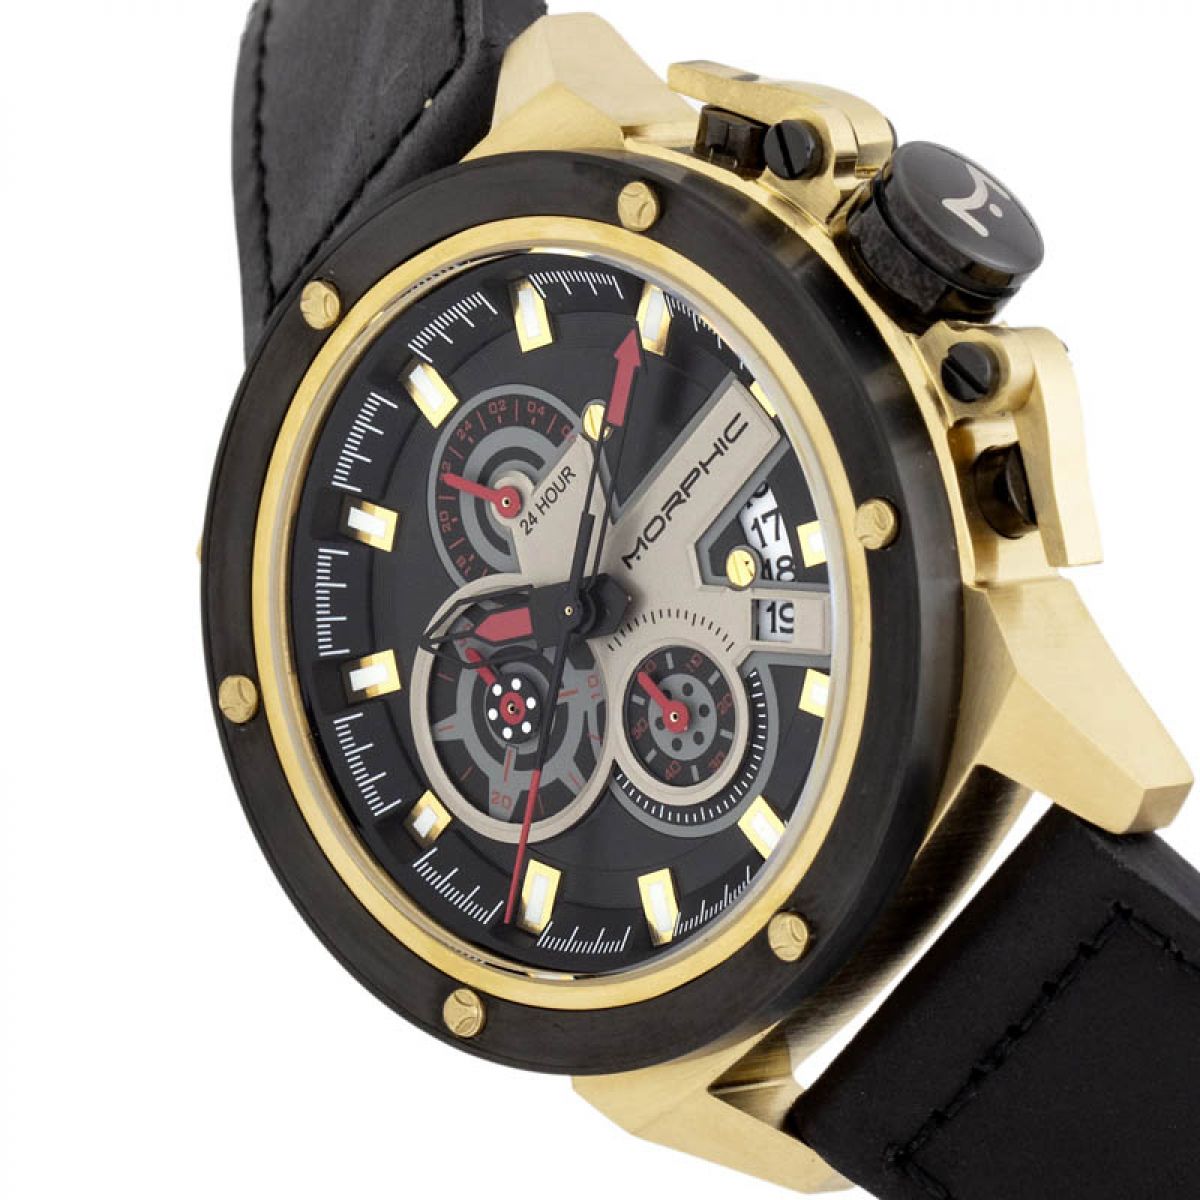 Morphic MPH8103 Chronograph Series Leather